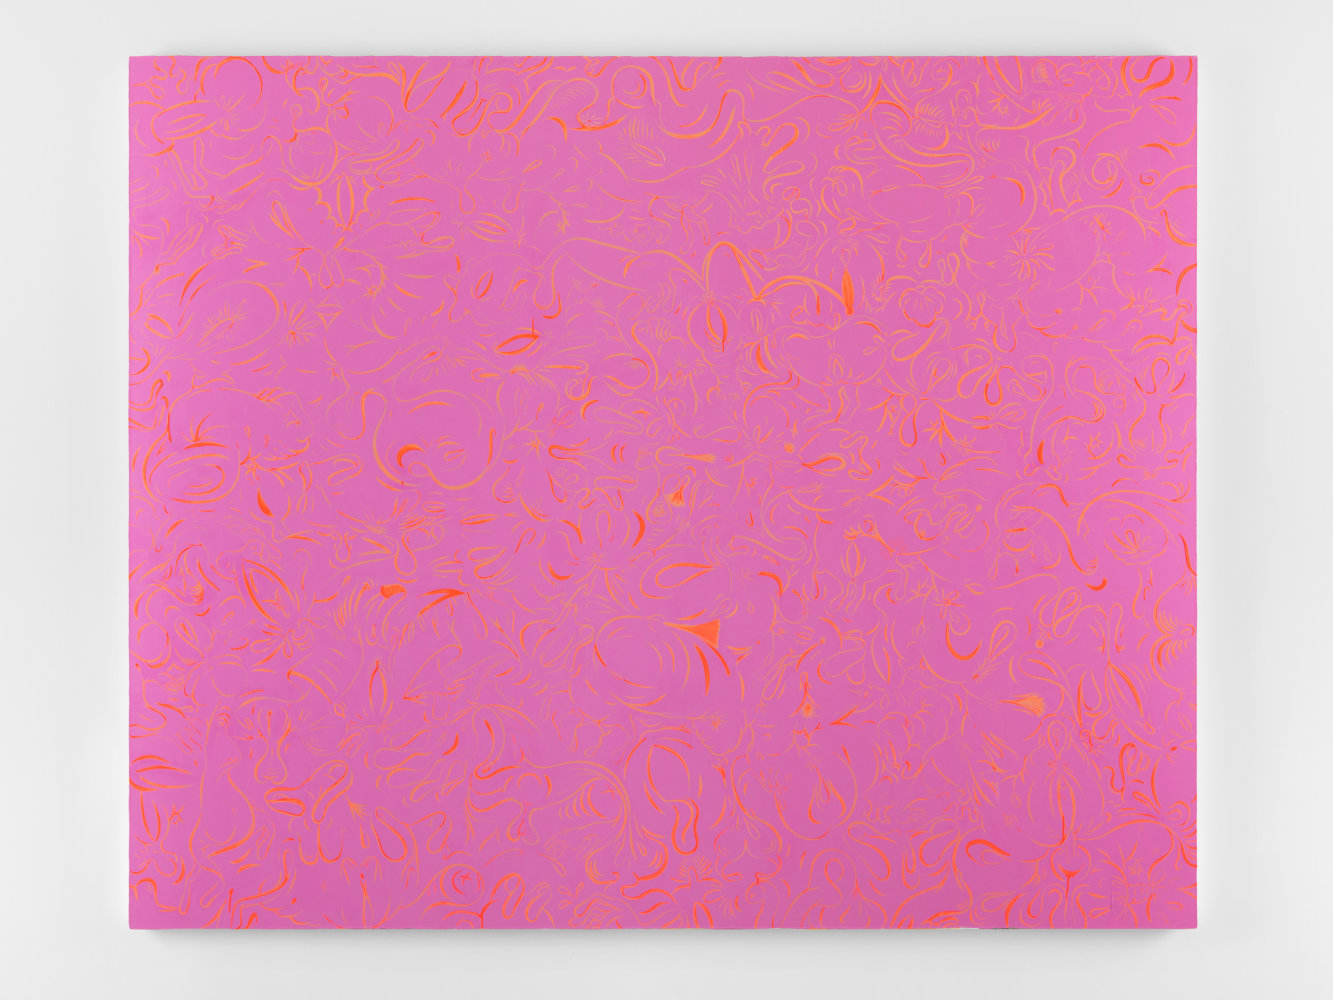 Sue Williams

Fluorescent and Flooby

2003

Oil and acrylic on canvas

84 x 104 1/4 inches (213.4 x 264.8 cm)

Signed, dated verso

SW 962

&amp;nbsp;

INQUIRE